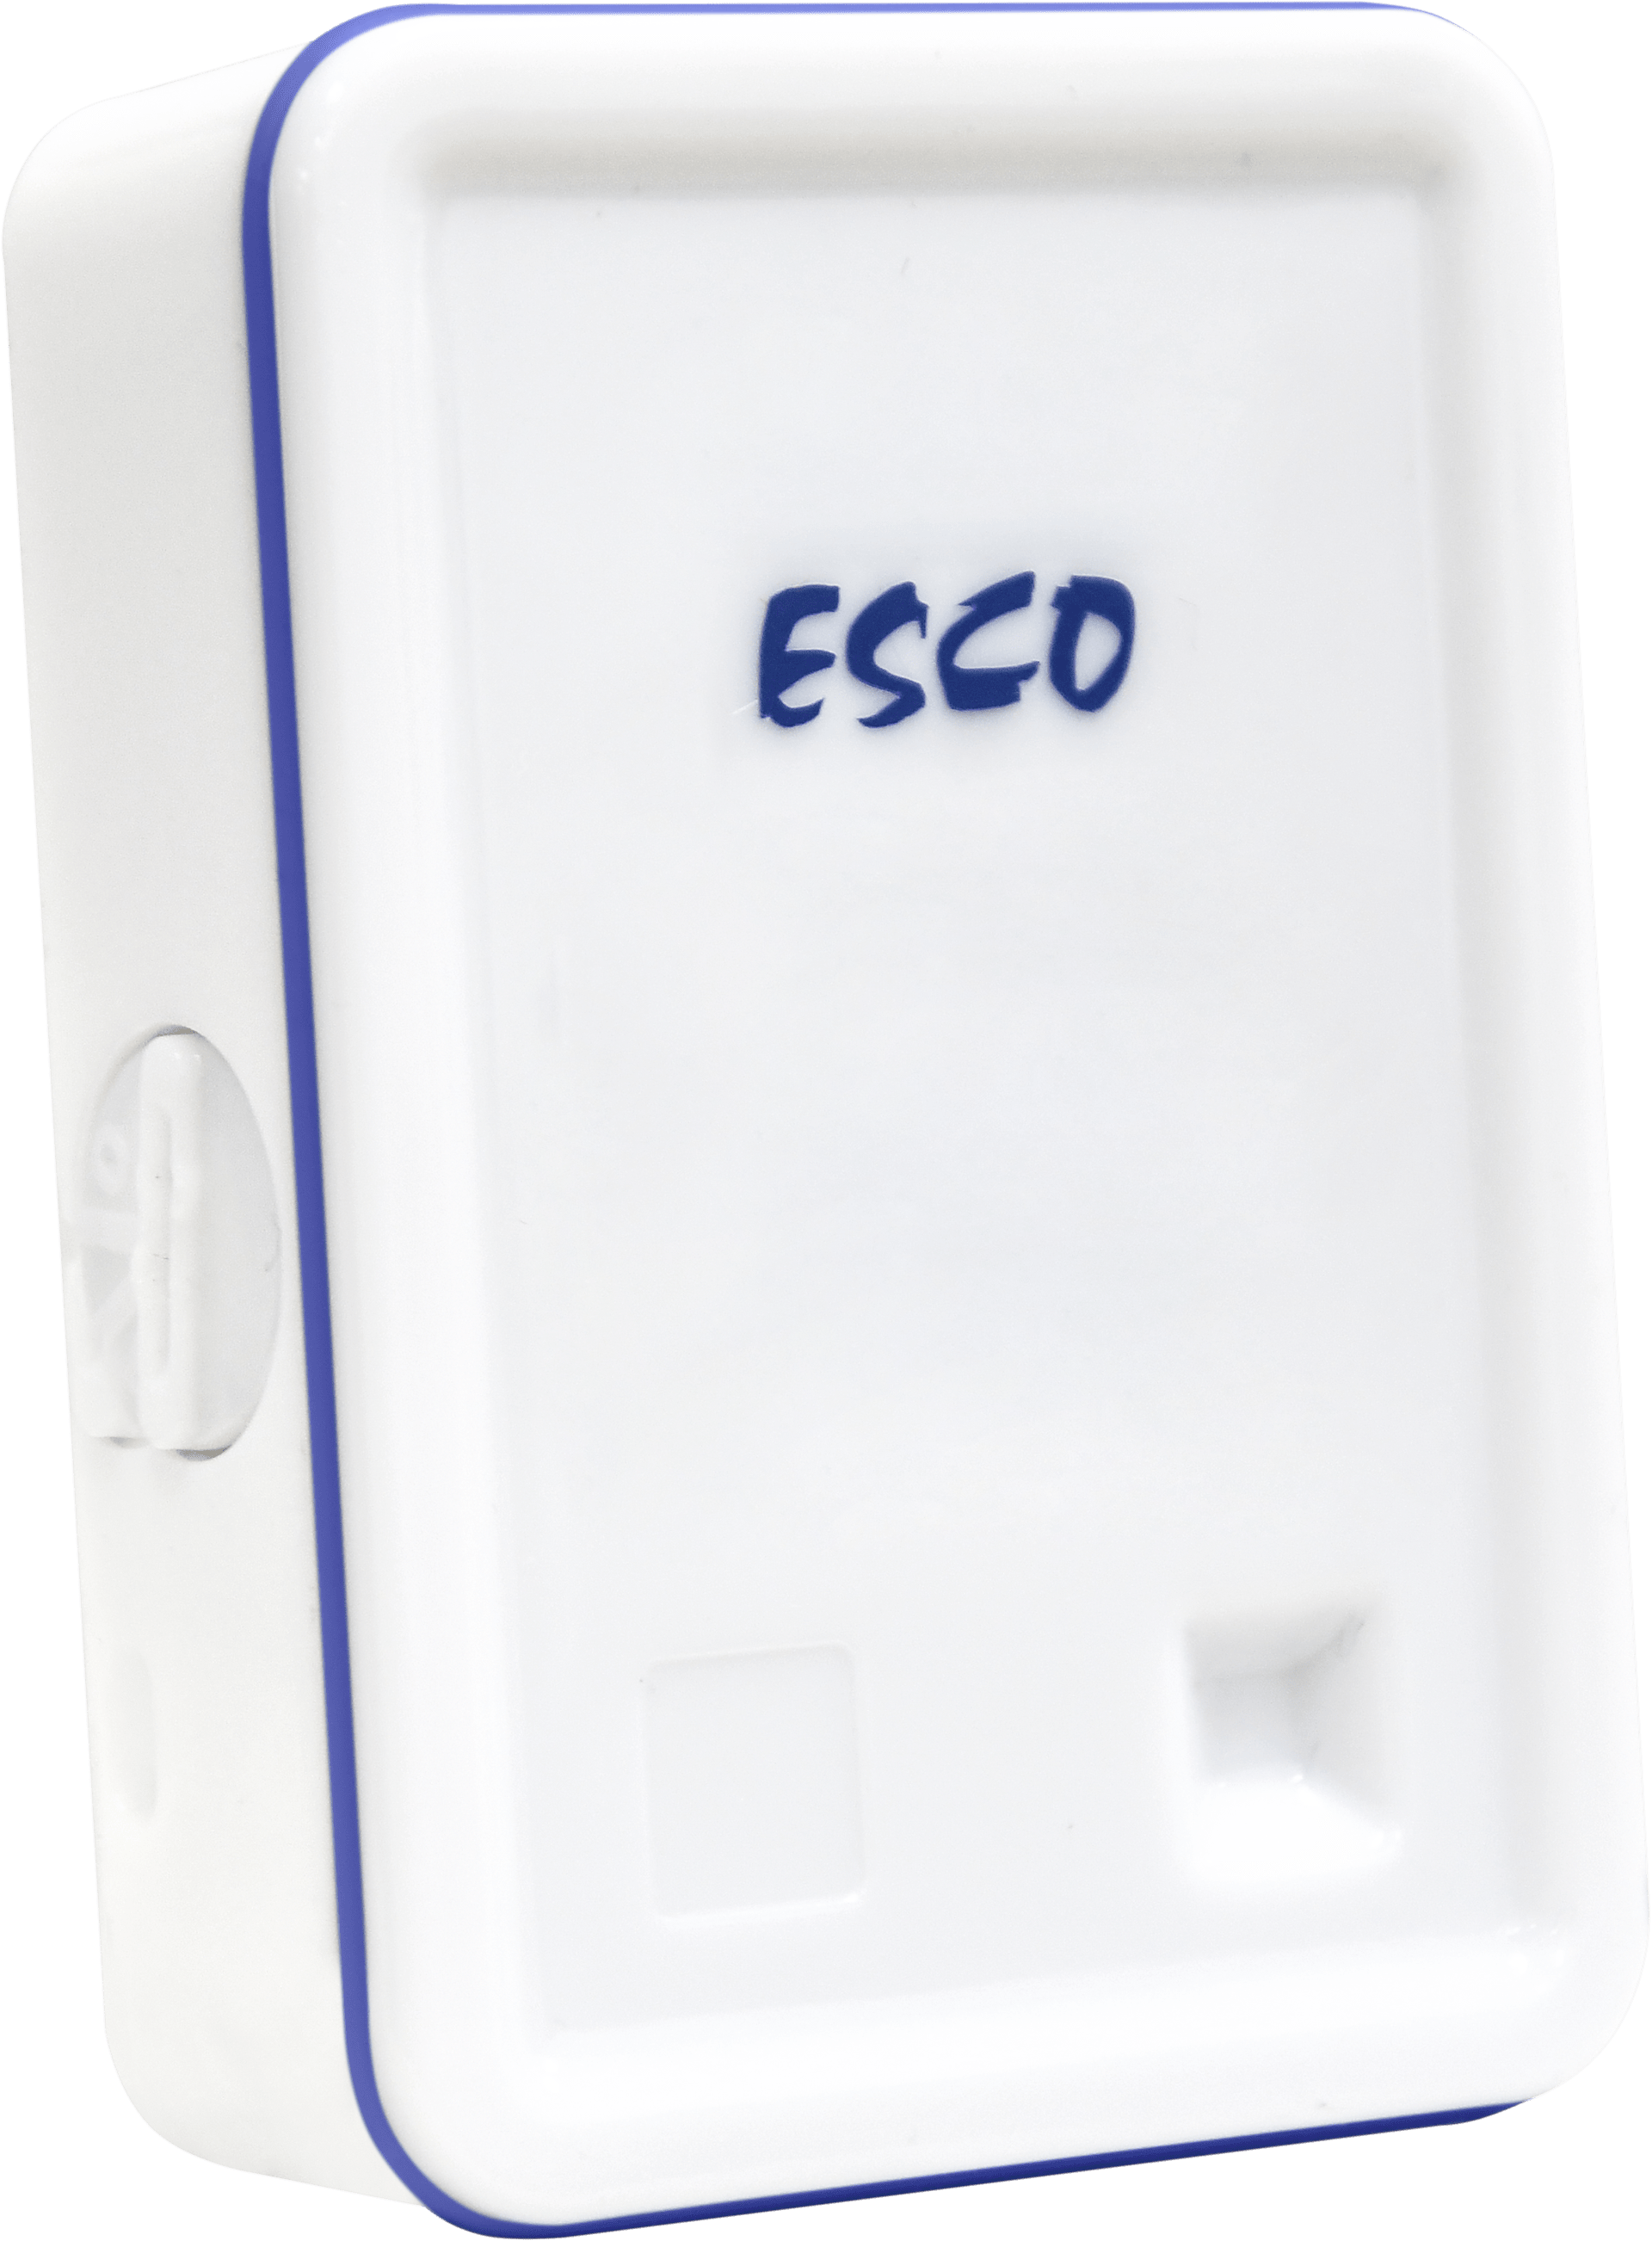 NEW Esco PROtect Wireless Monitoring System